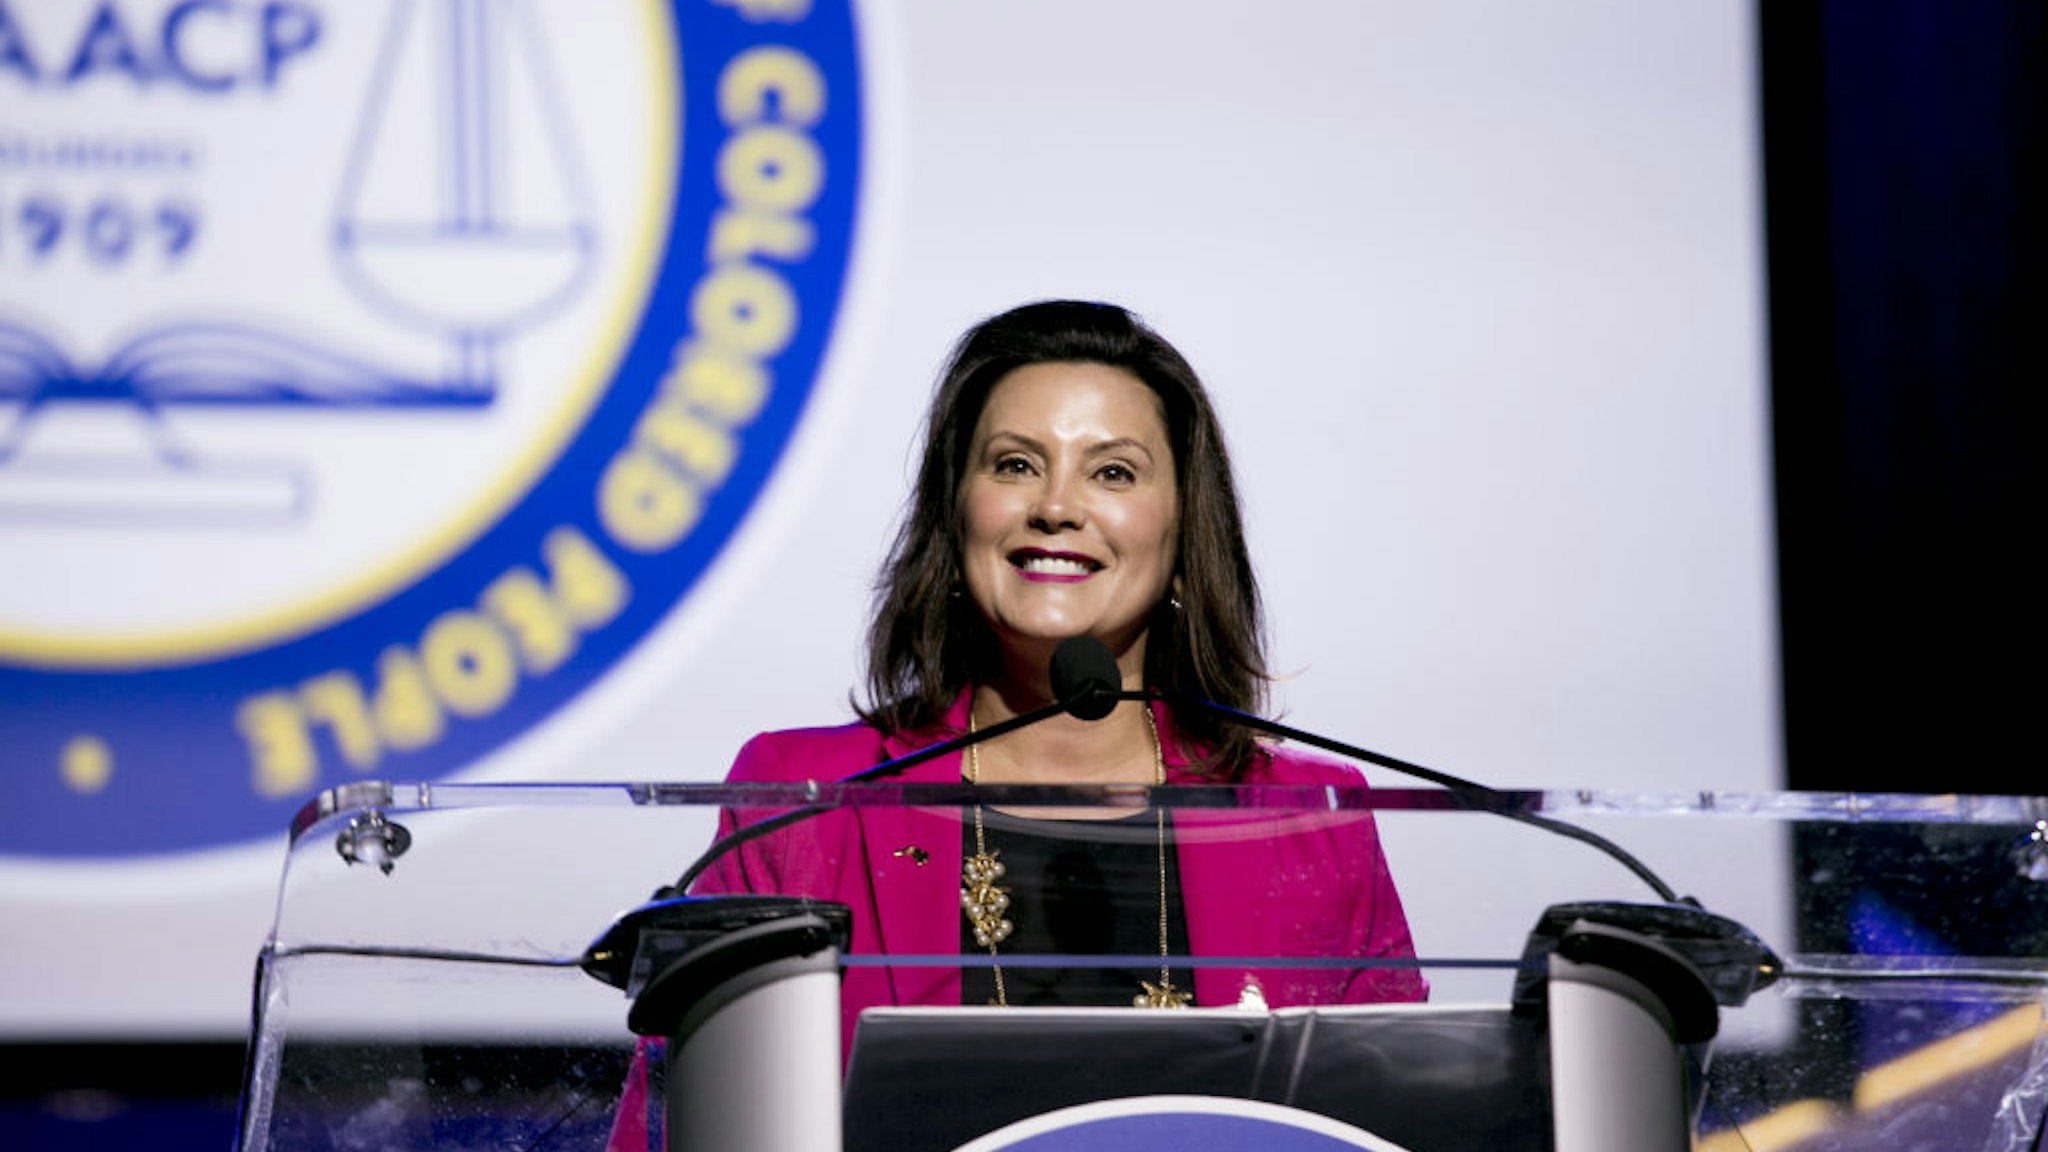 Gretchen Whitmer, governor of Michigan, smile while speaking during the 110th NAACP Annual Convention in Detroit, Michigan, U.S., on Monday, July 22, 2019. Democrats are launching a campaign in seven battleground states to make the case against Donald Trump's economy, seeking to neutralize the president's strongest political asset as his re-election campaign heats up. Photographer: Anthony Lanzilote/Bloomberg via Getty Images